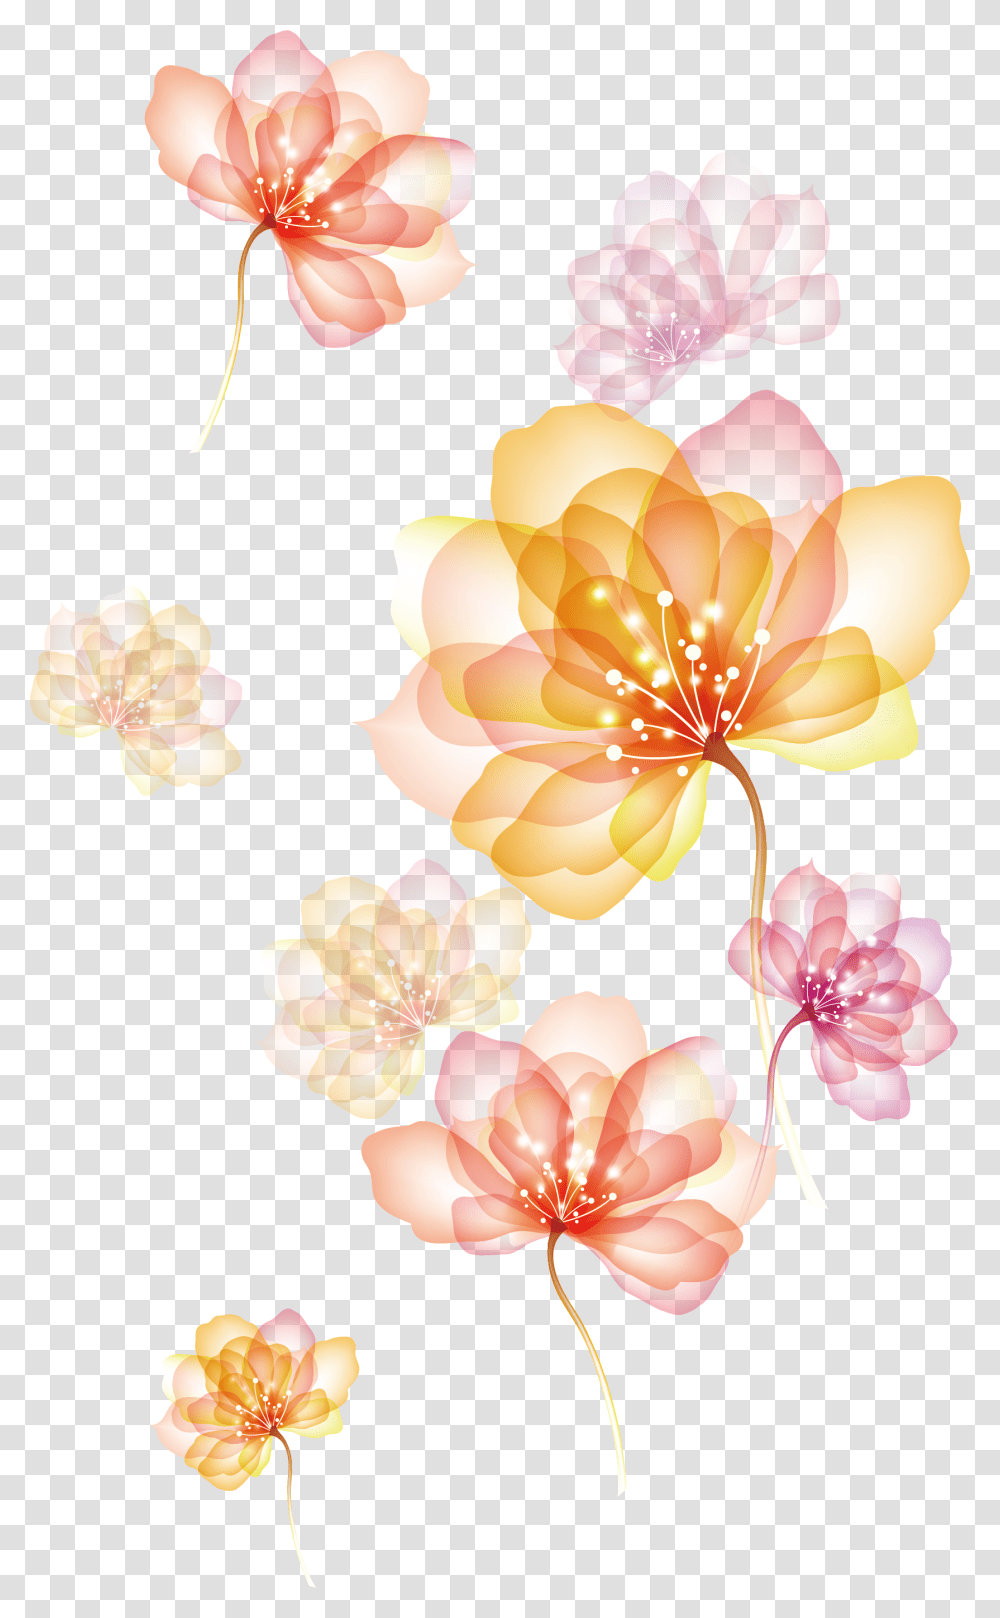 Of Spreading Flowers Effect Hd Image Free Clipart Flower Effect, Floral Design, Pattern, Plant Transparent Png